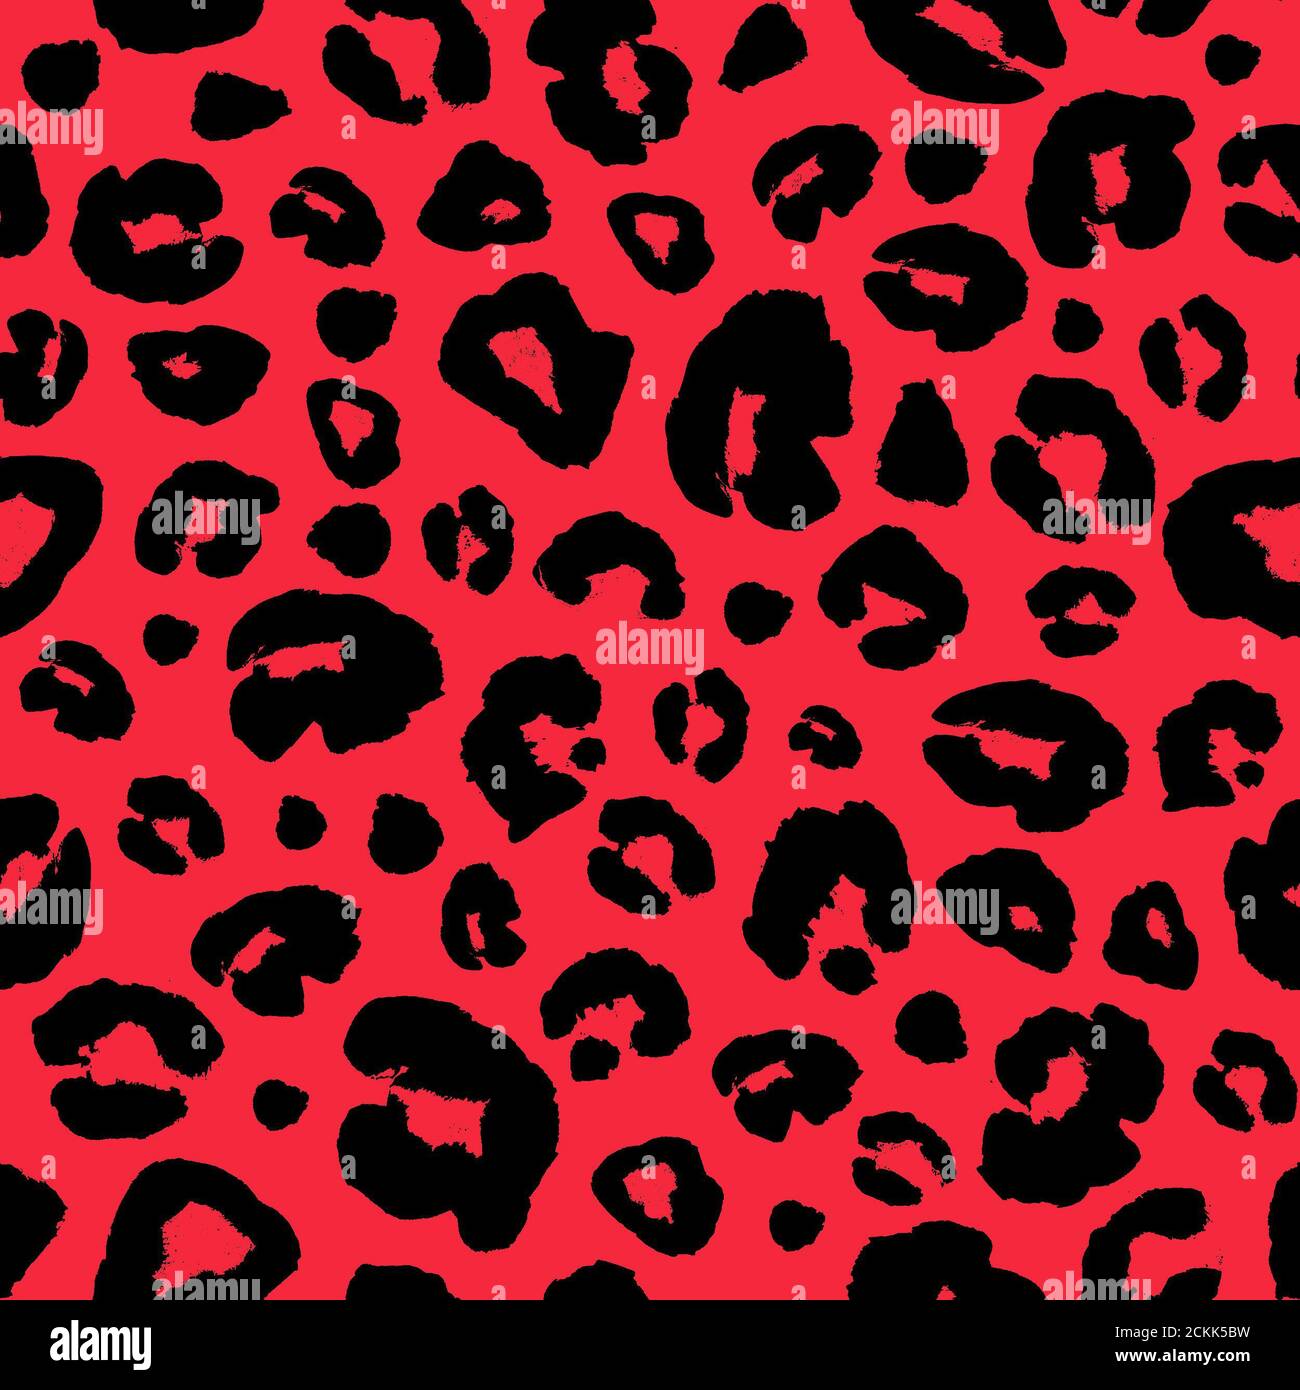 Leopard skin print seamless pattern background. Animal fur spot abstract camouflage texture. Black and red hand drawn spotted print for textile, fabri Stock Photo